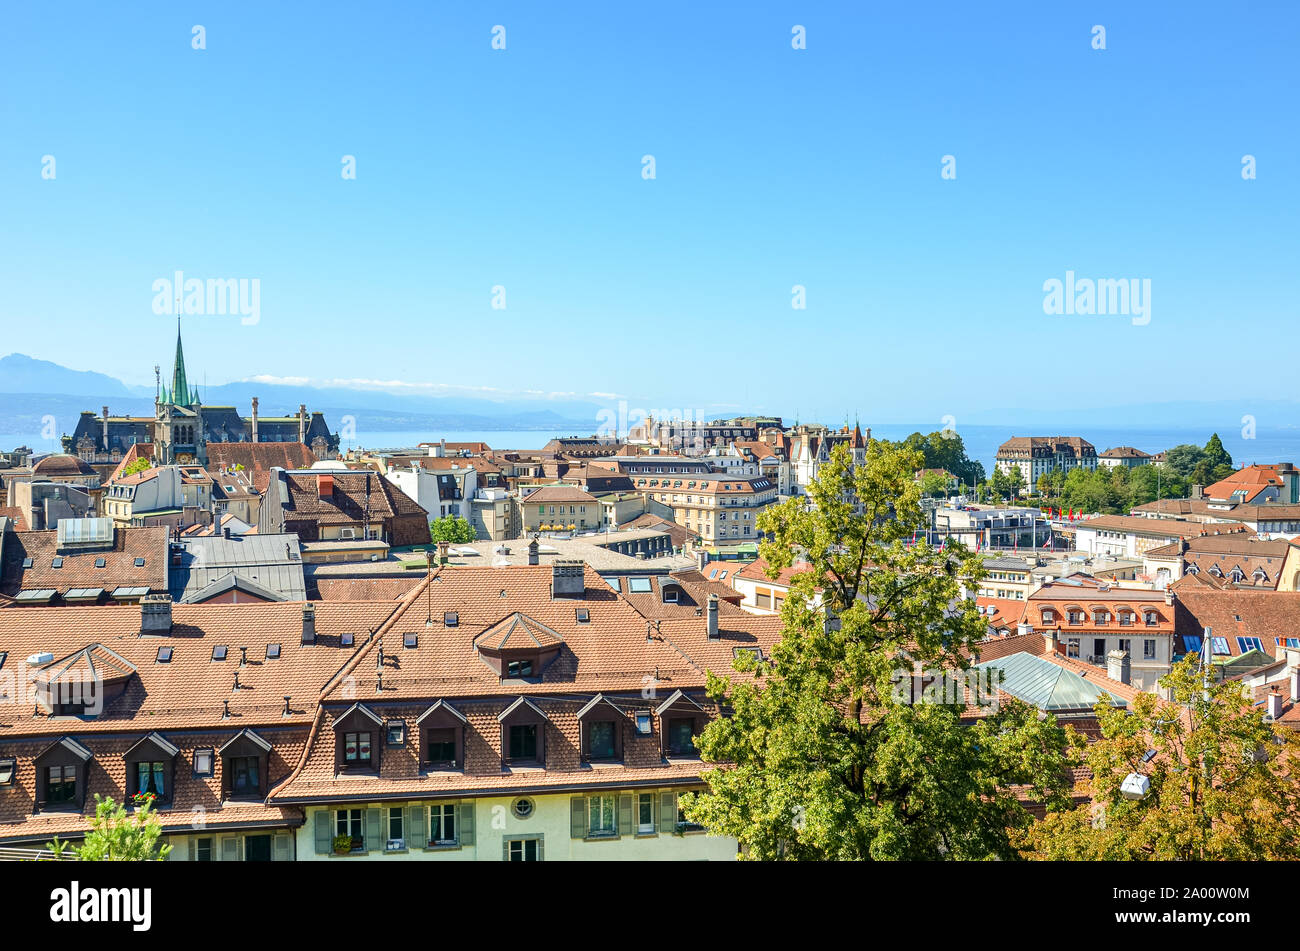 Beautiful cityscape of Lausanne, Switzerland photographed from view point above the city. Geneva Lake and mountains in the background. Historical buildings, Swiss city. French speaking Switzerland. Stock Photo